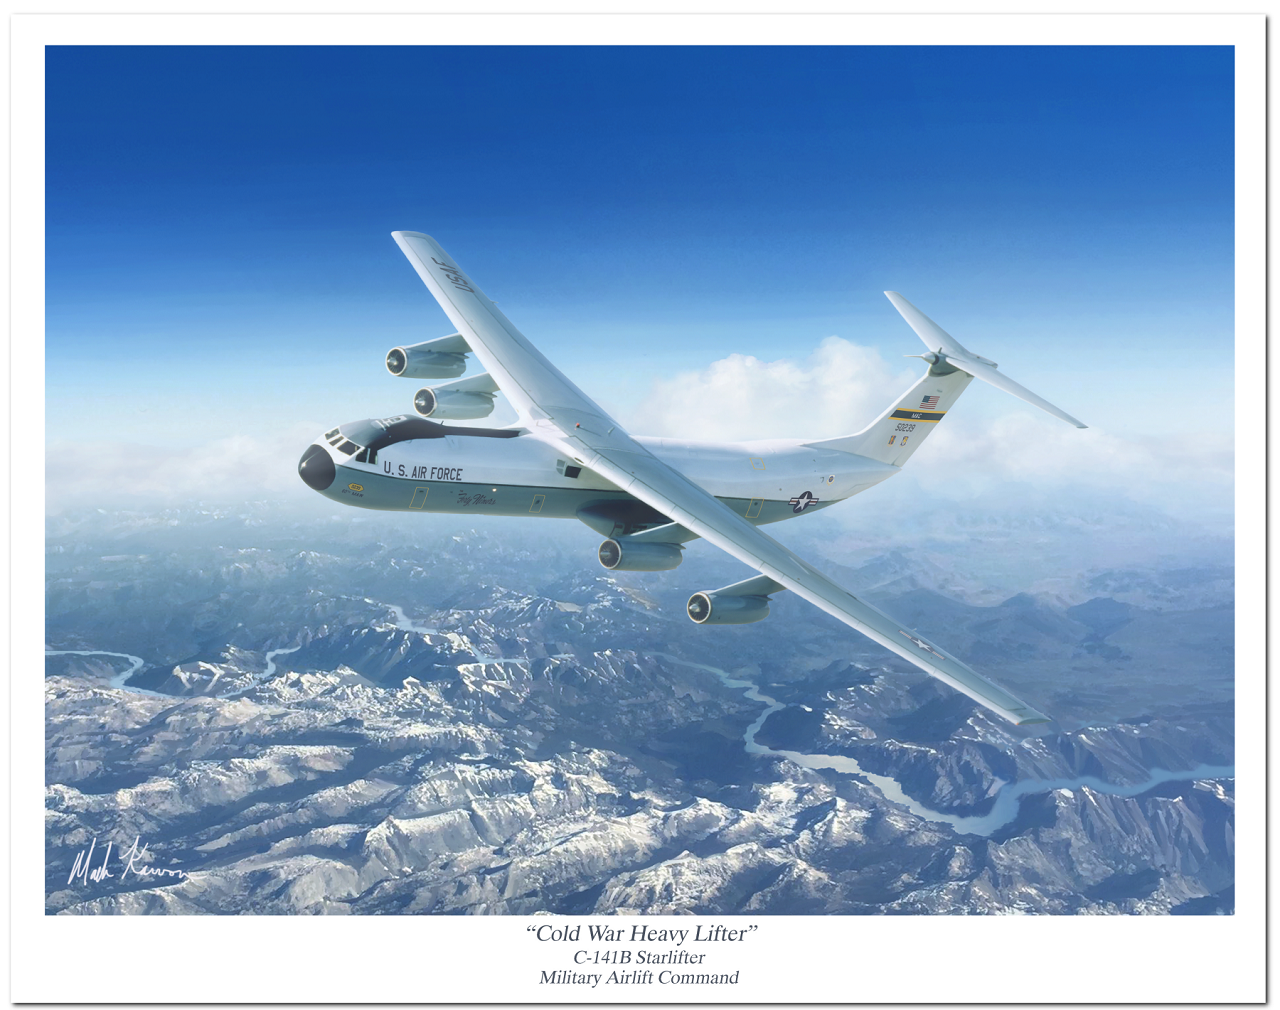 "Cold War Heavy Lifter" by Mark Karvon, featuring the C-141B Starlifter